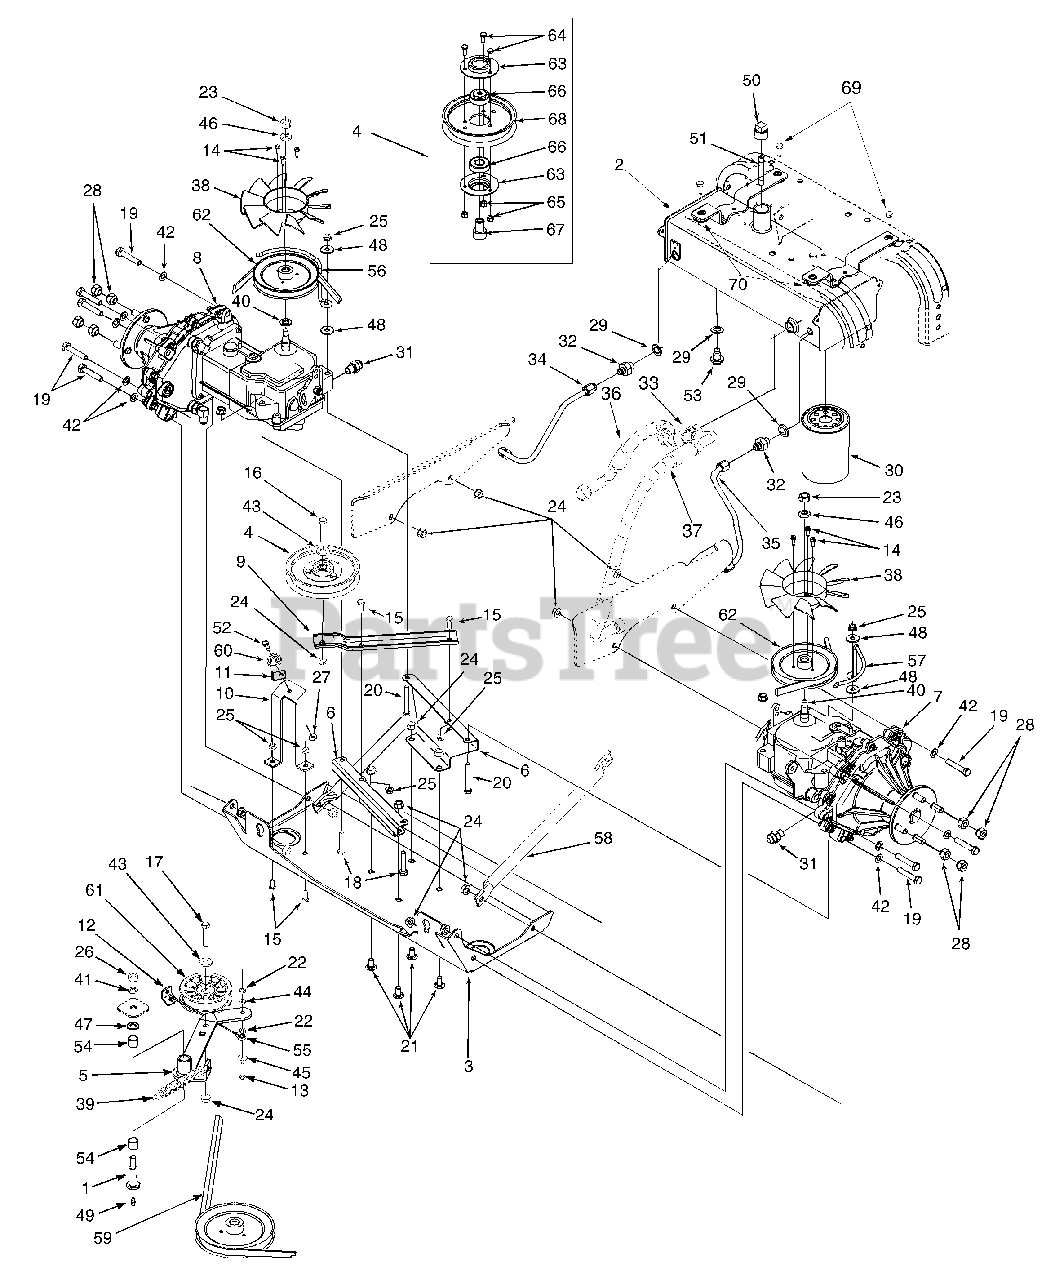 Cub Cadet 6 Prong Ignition Switch Wiring Diagram from www.partstree.com